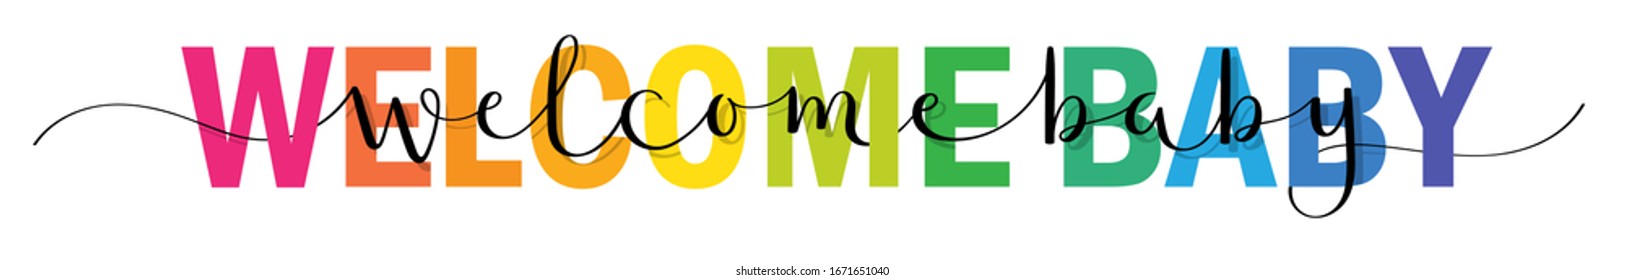 WELCOME BABY mixed rainbow-colored vector typography banner with brush calligraphy